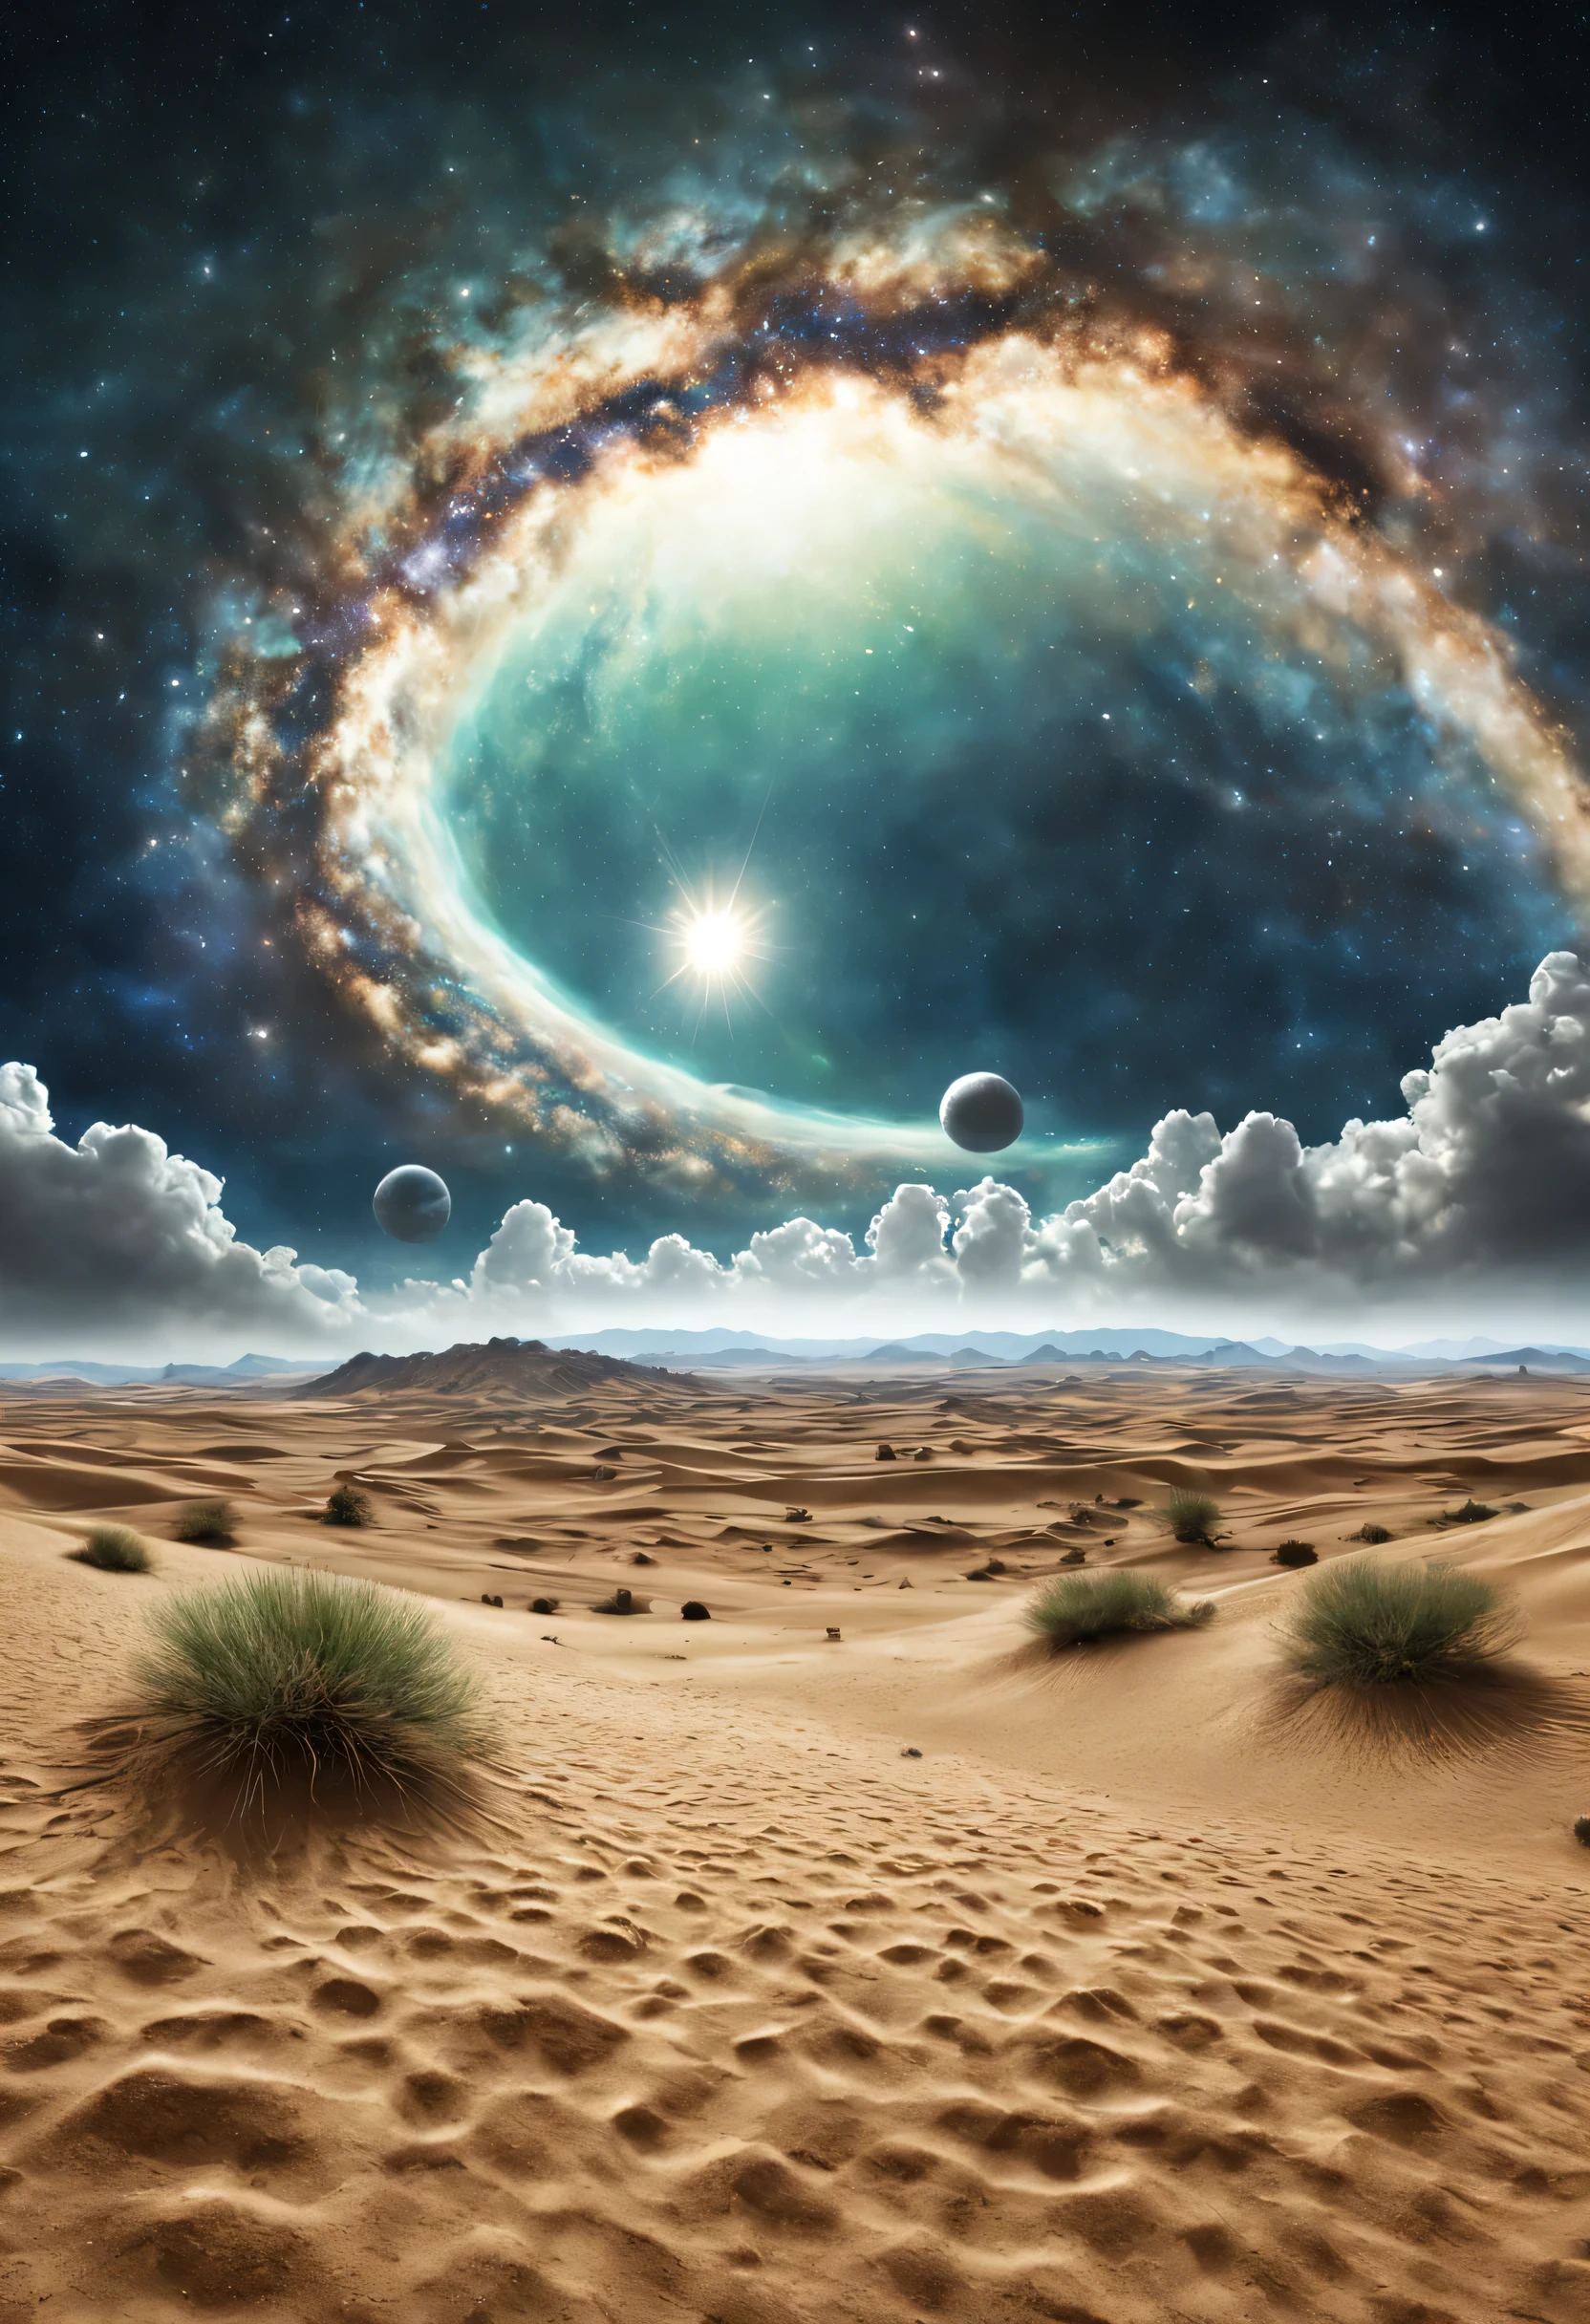 buzzer, desert, emerald dust, Sky, large clouds, blue-Sky, Milky Way, planet, The weather is hot, HD details, Super detailed, kinematics, Surrealism, soft light, Deep field focus bokeh, The distant landscape is a desert with no end, Ray tracing, This is Surrealism. --v6